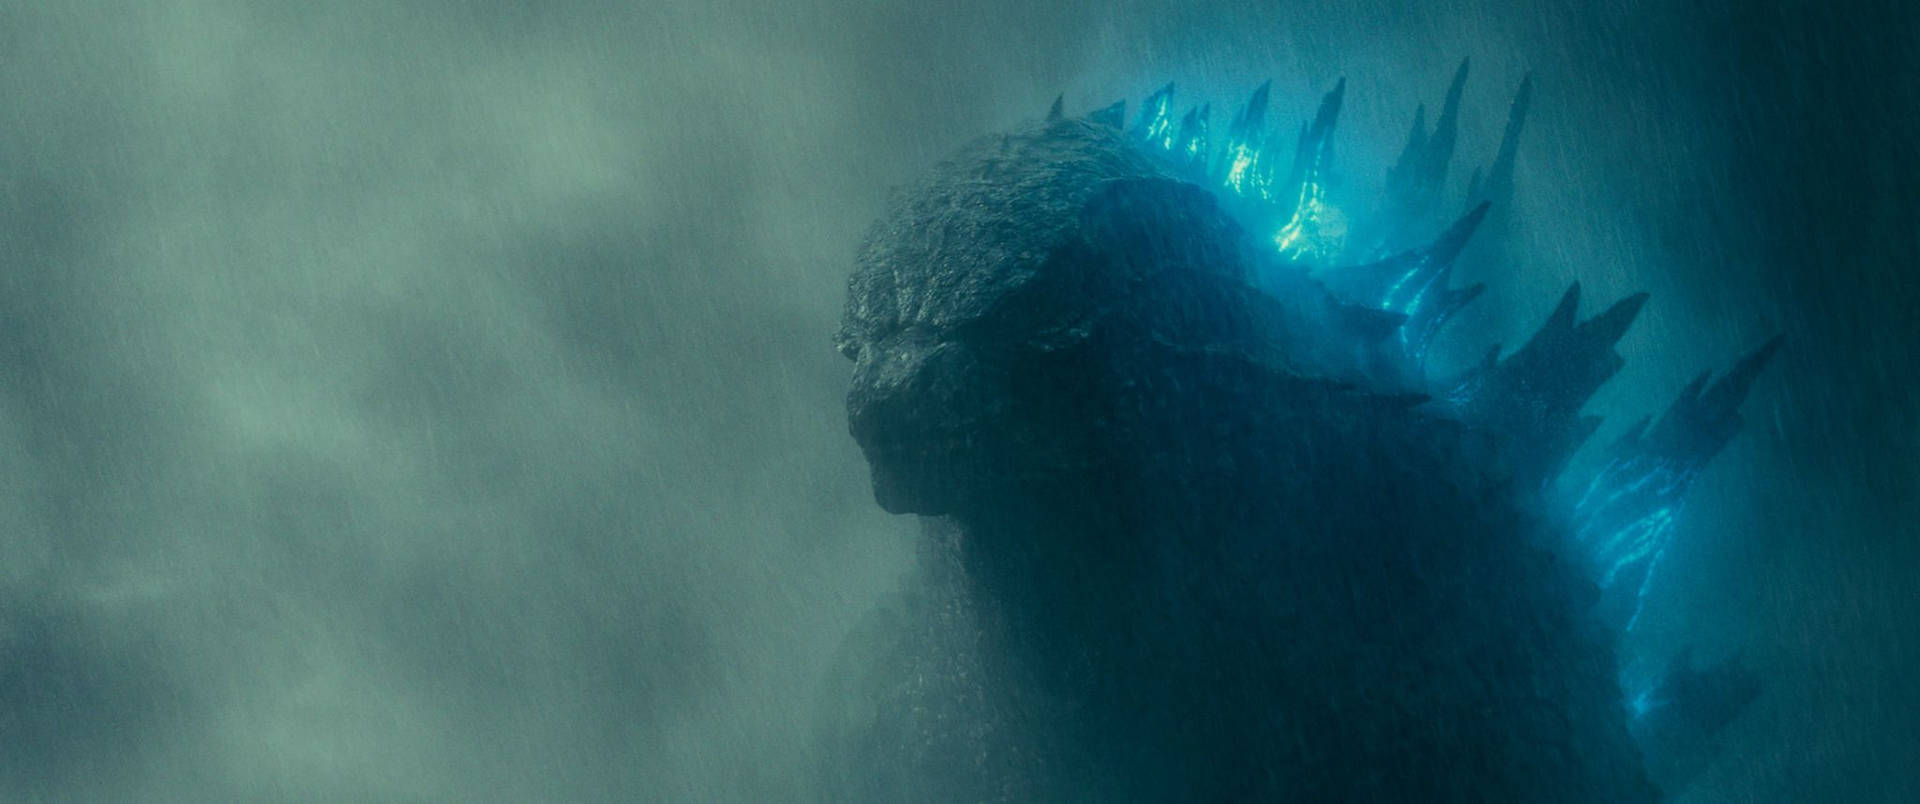 Best Ultra Hd Godzilla King Of The Monsters Background